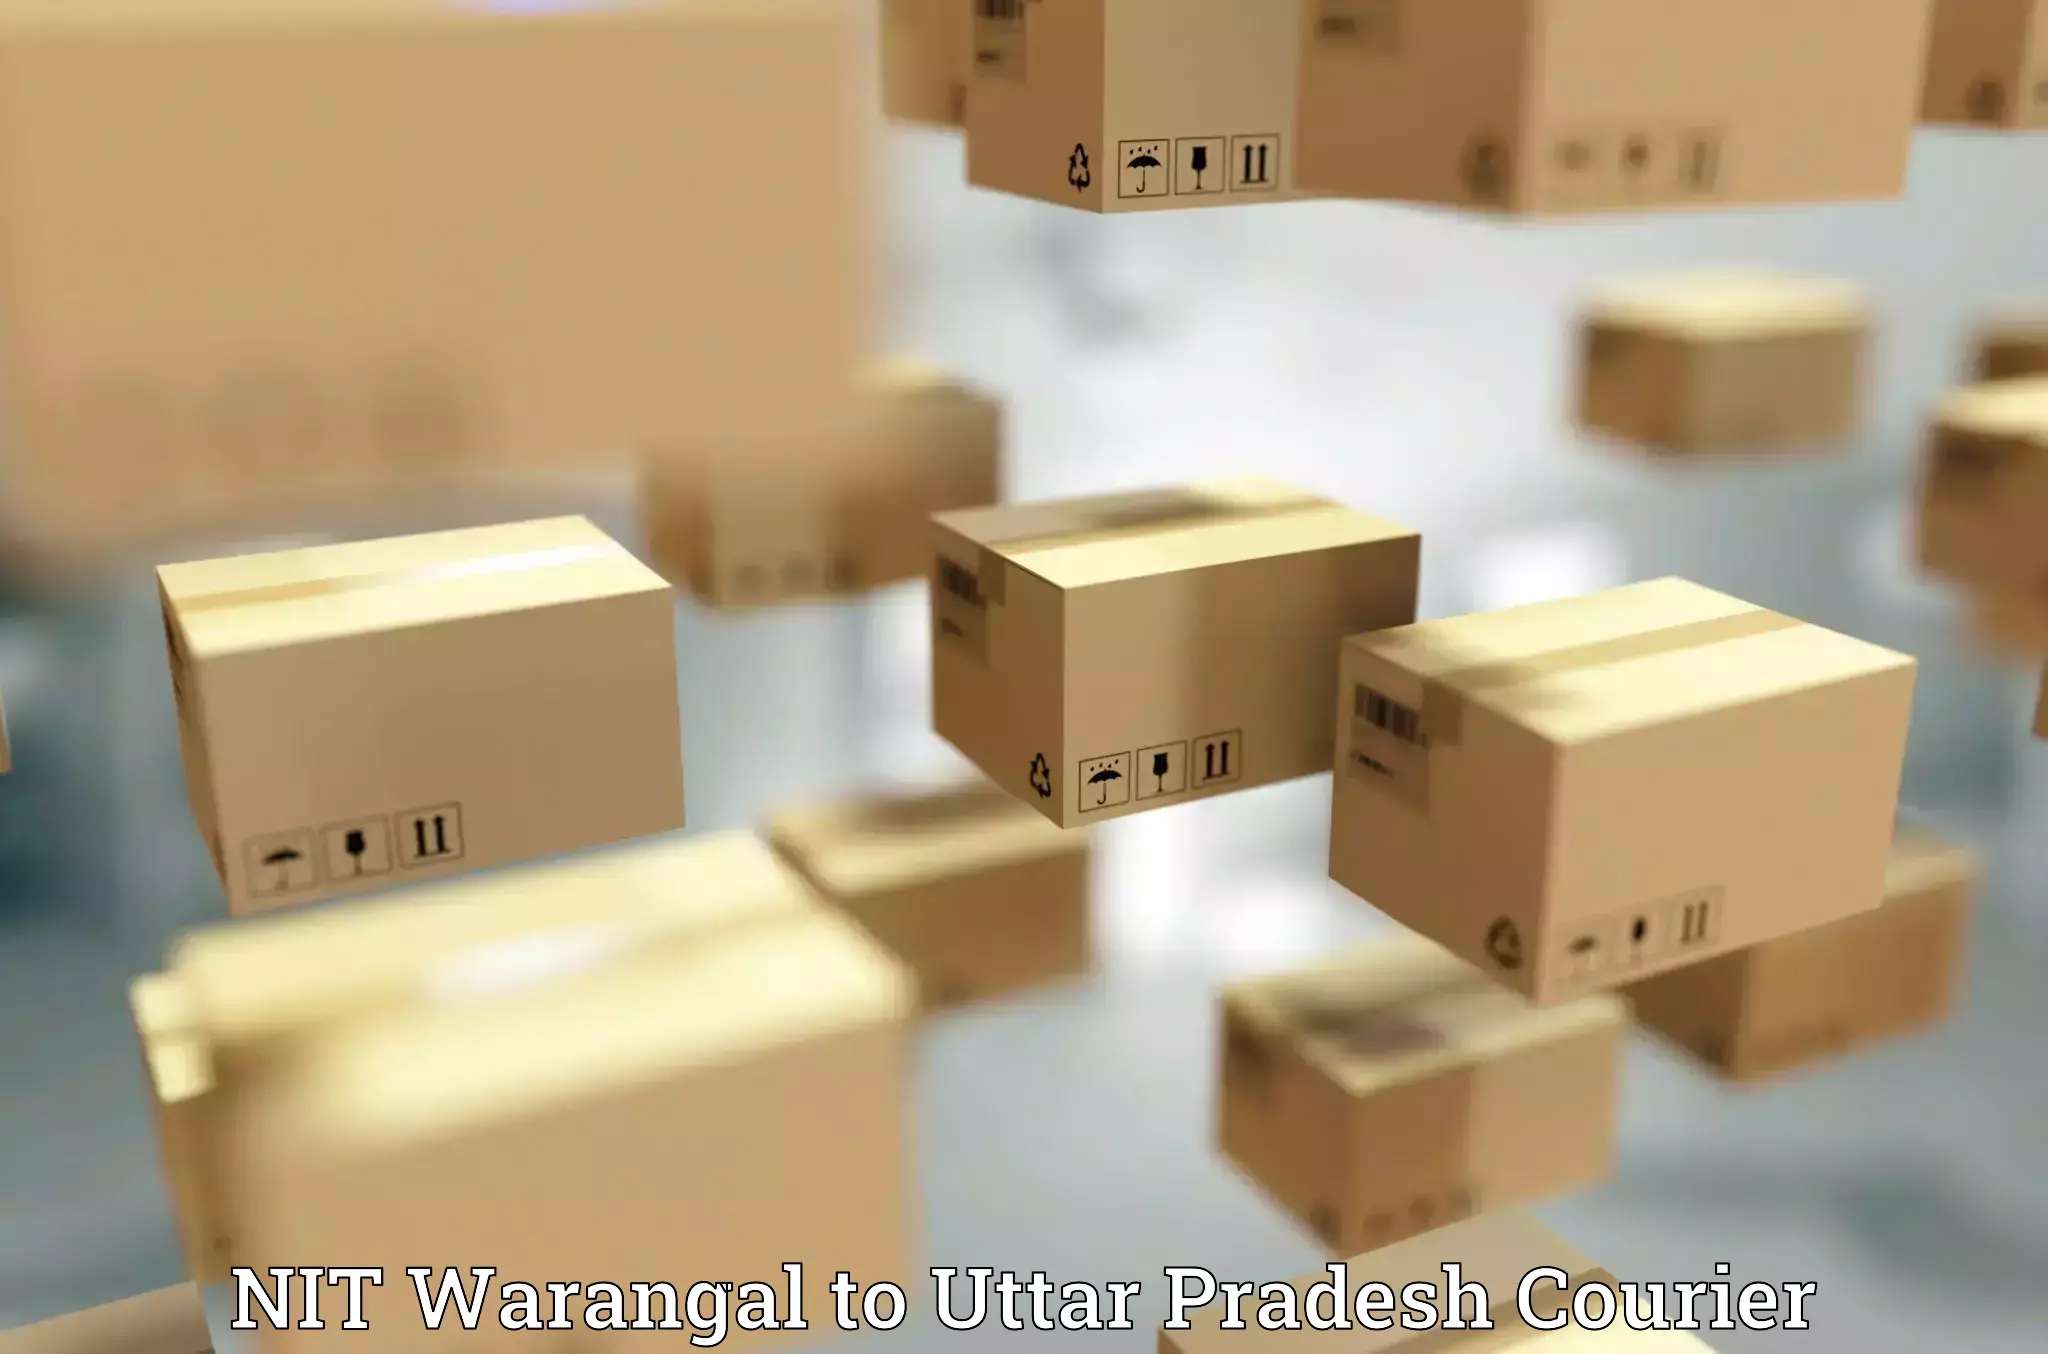 Nationwide courier service NIT Warangal to Maripeda